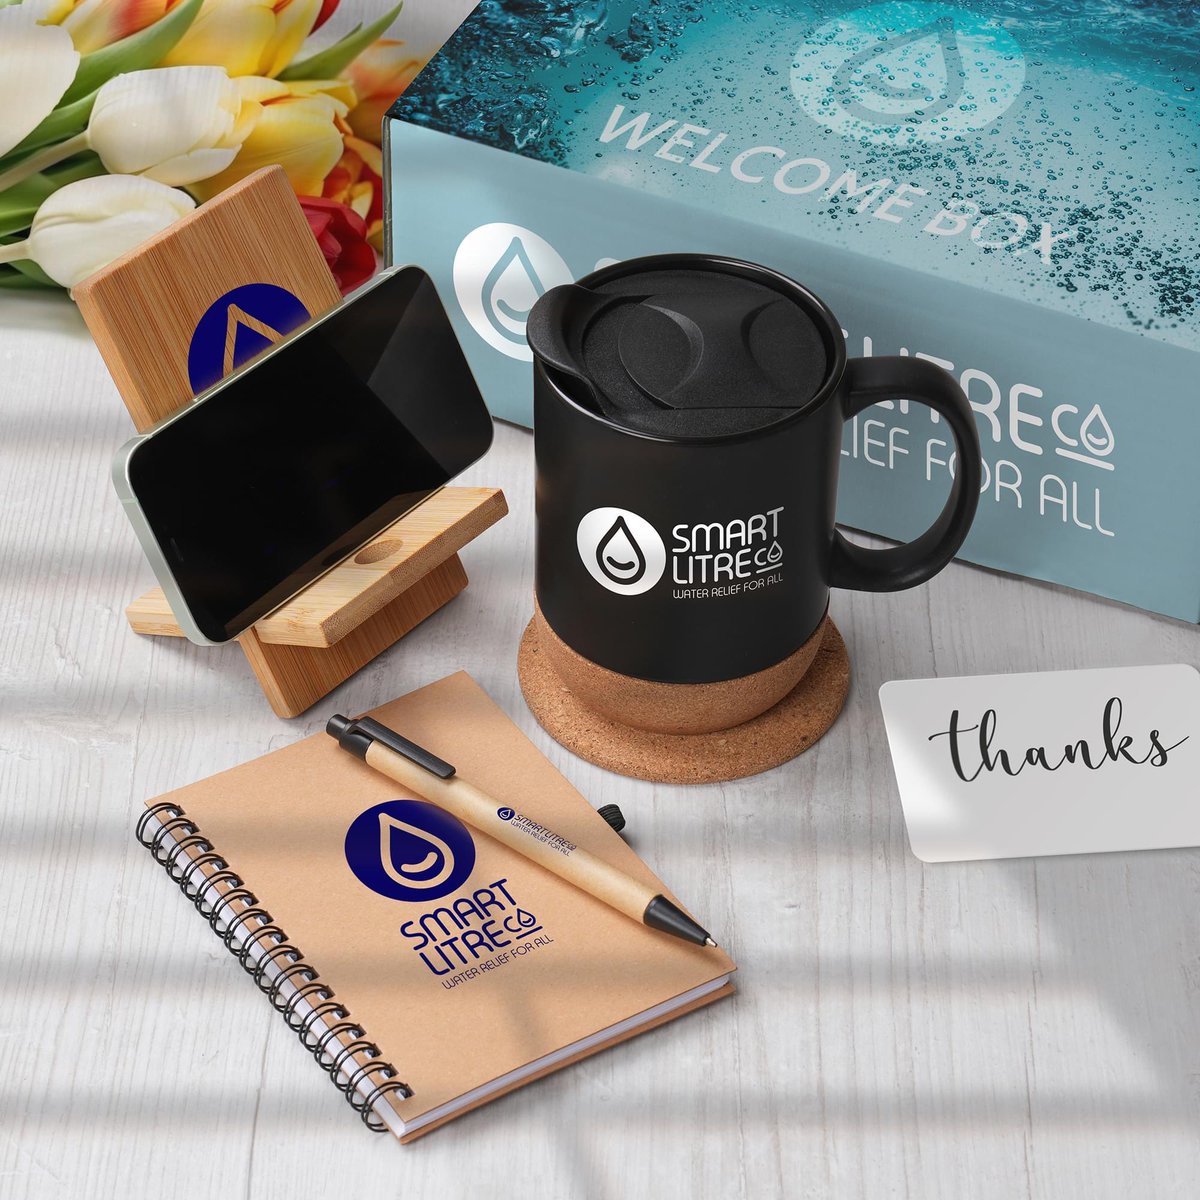 GO GREEN WELCOME PACK 💚💚💚
Eco-friendly gift sets with a range of reusable products made with natural, recycled or sustainable materials. Include products personalised with your company branding. 
#welcomepacks #giftsets #ecofriendly #newstarterpacks #branded #branding #events